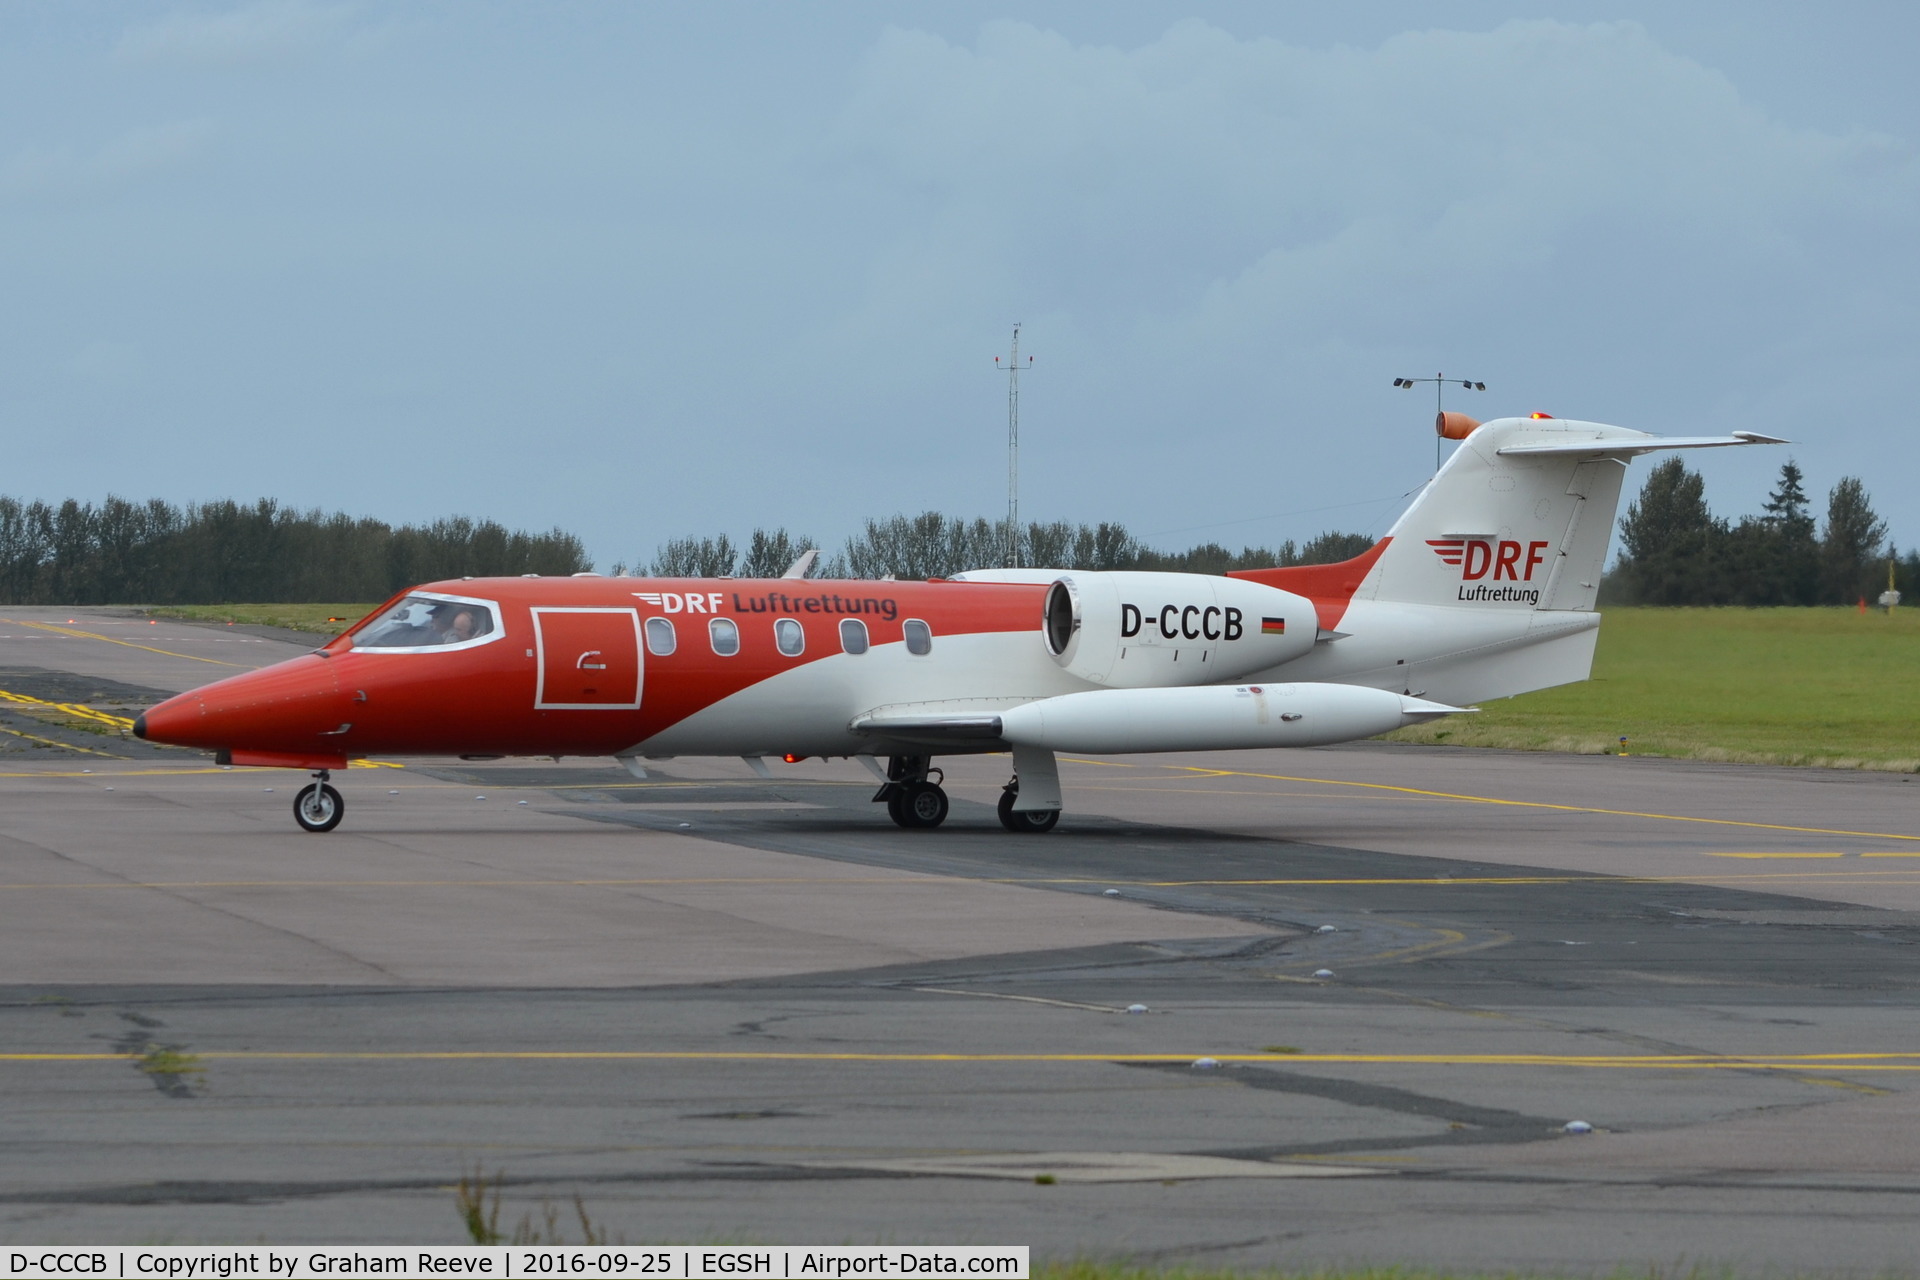 D-CCCB, 1990 Learjet 35A C/N 35A-663, Just landed at Norwich.